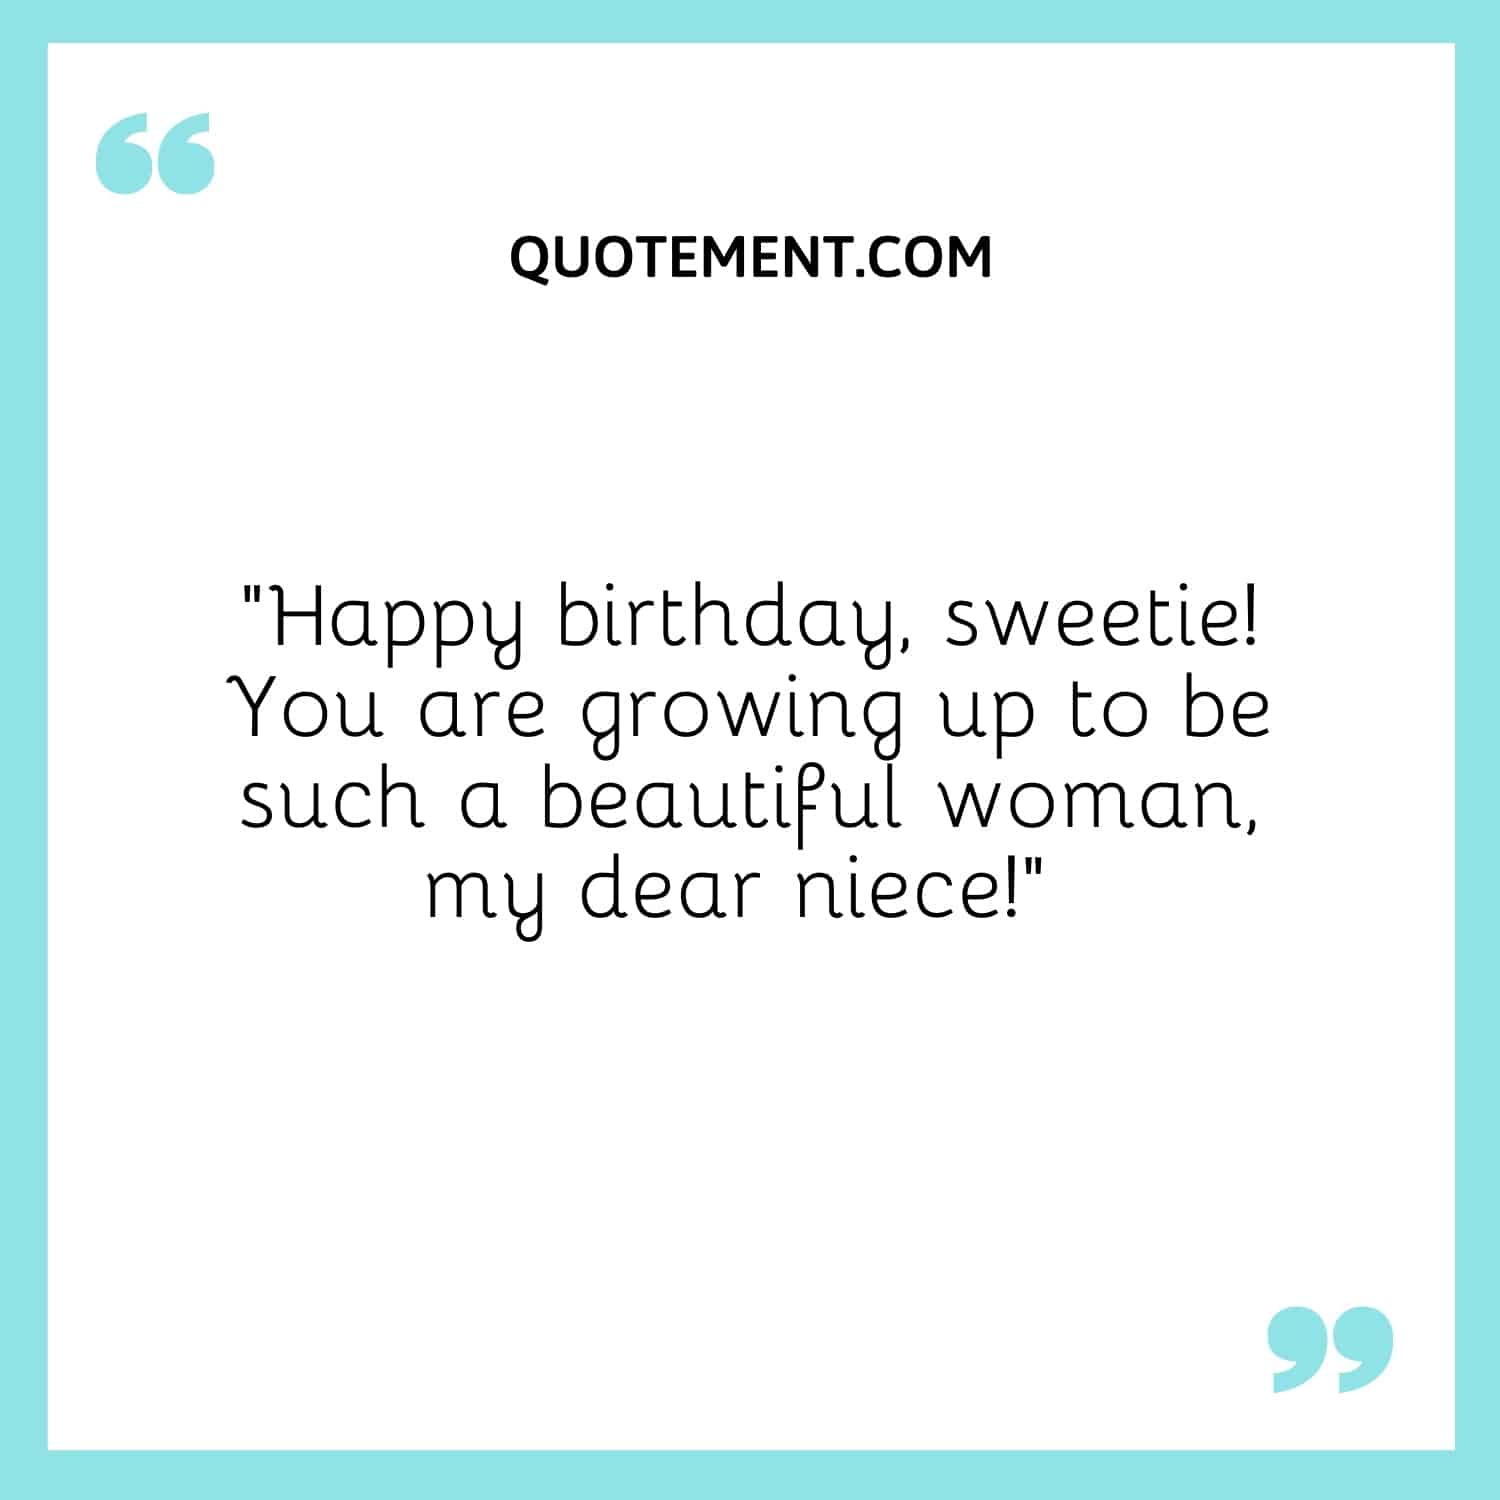 “Happy birthday, sweetie! You are growing up to be such a beautiful woman, my dear niece!”